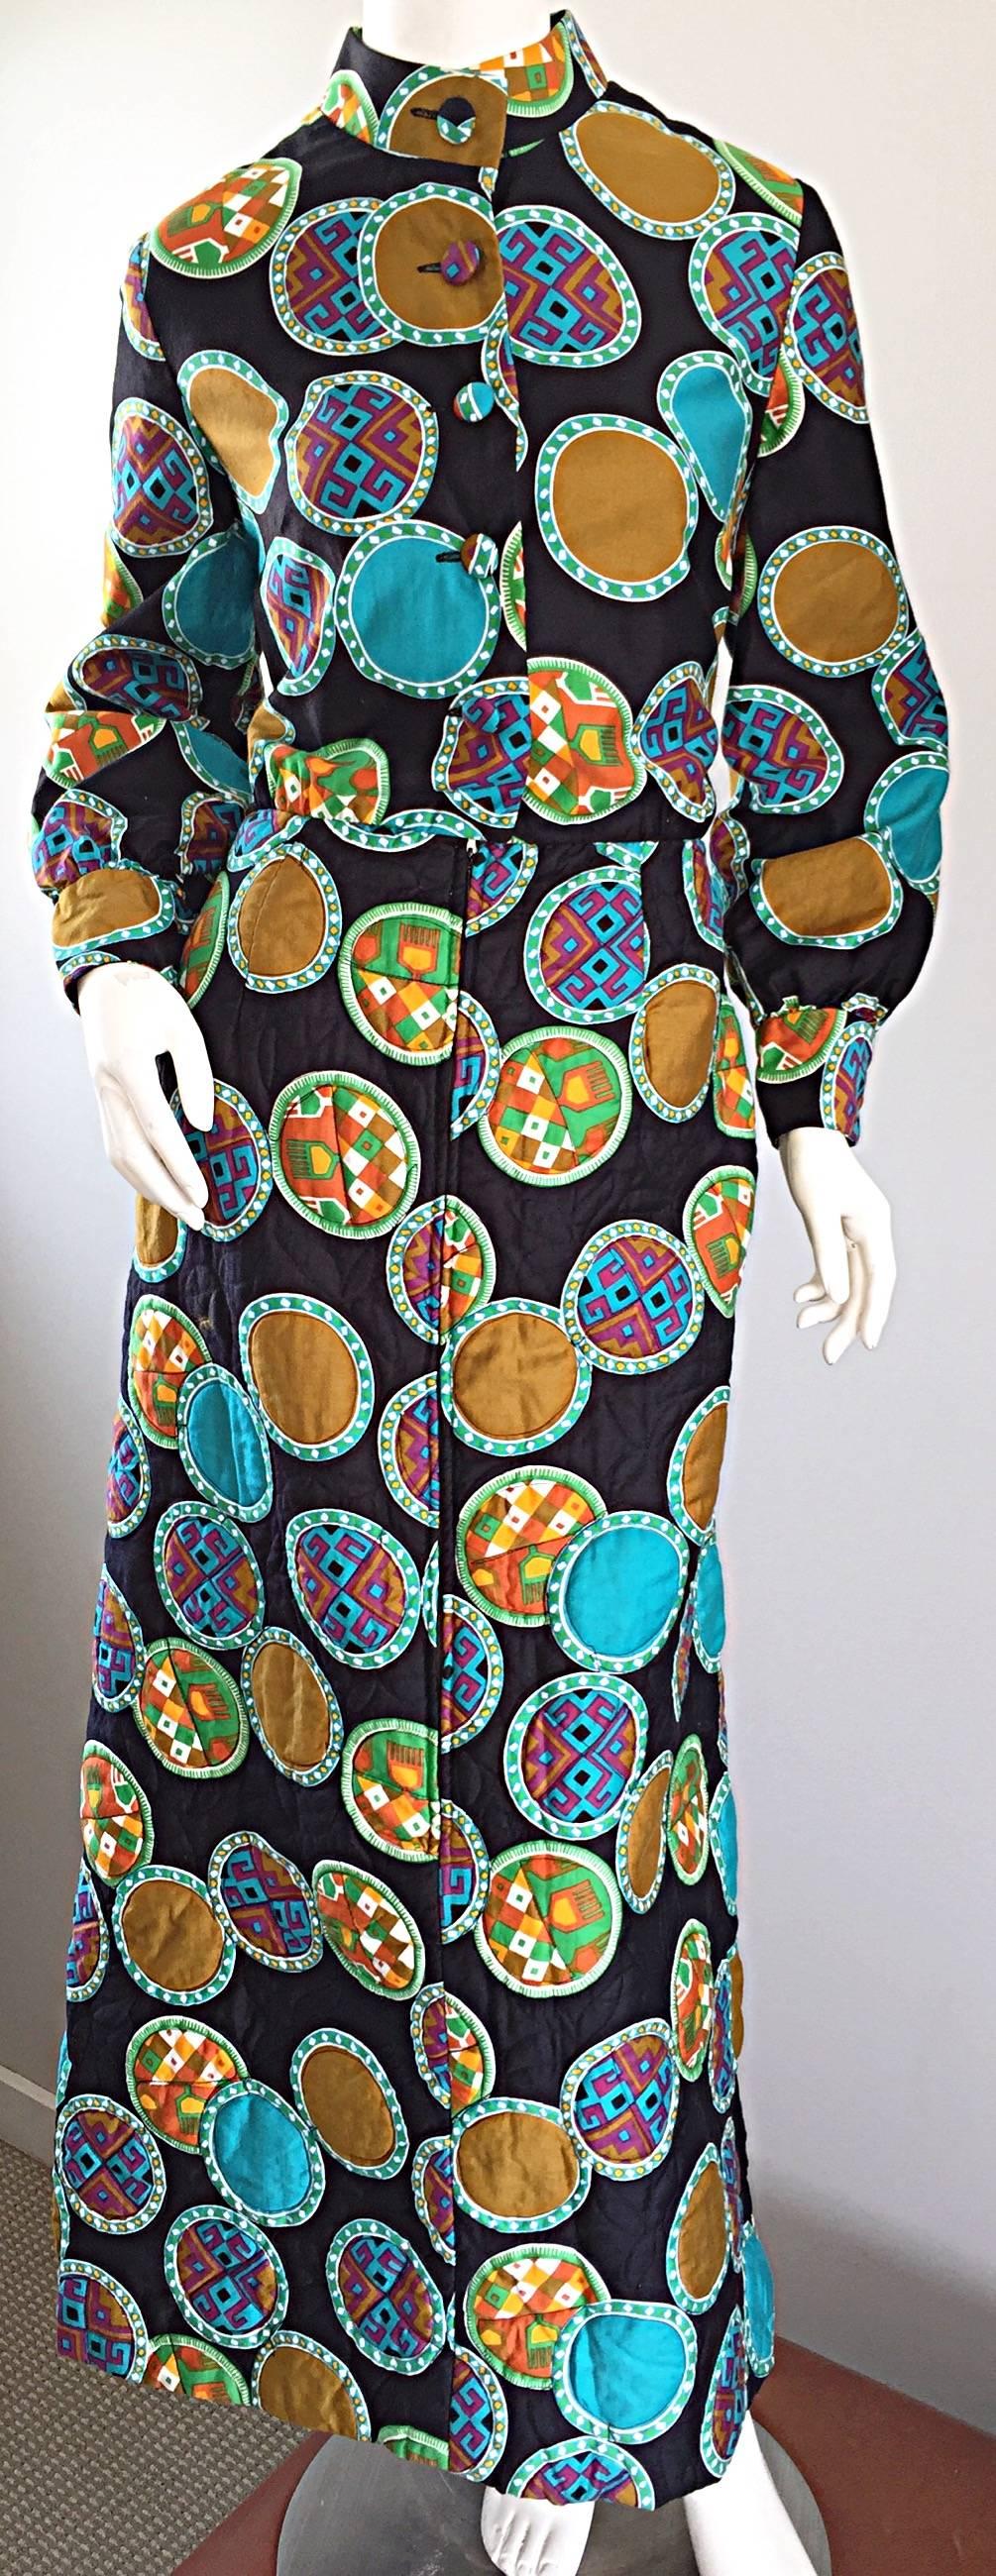 Vintage Dynasty I Magnin Chinese Inspired 1970s 70s Long Sleeve Boho Maxi Dress For Sale 1